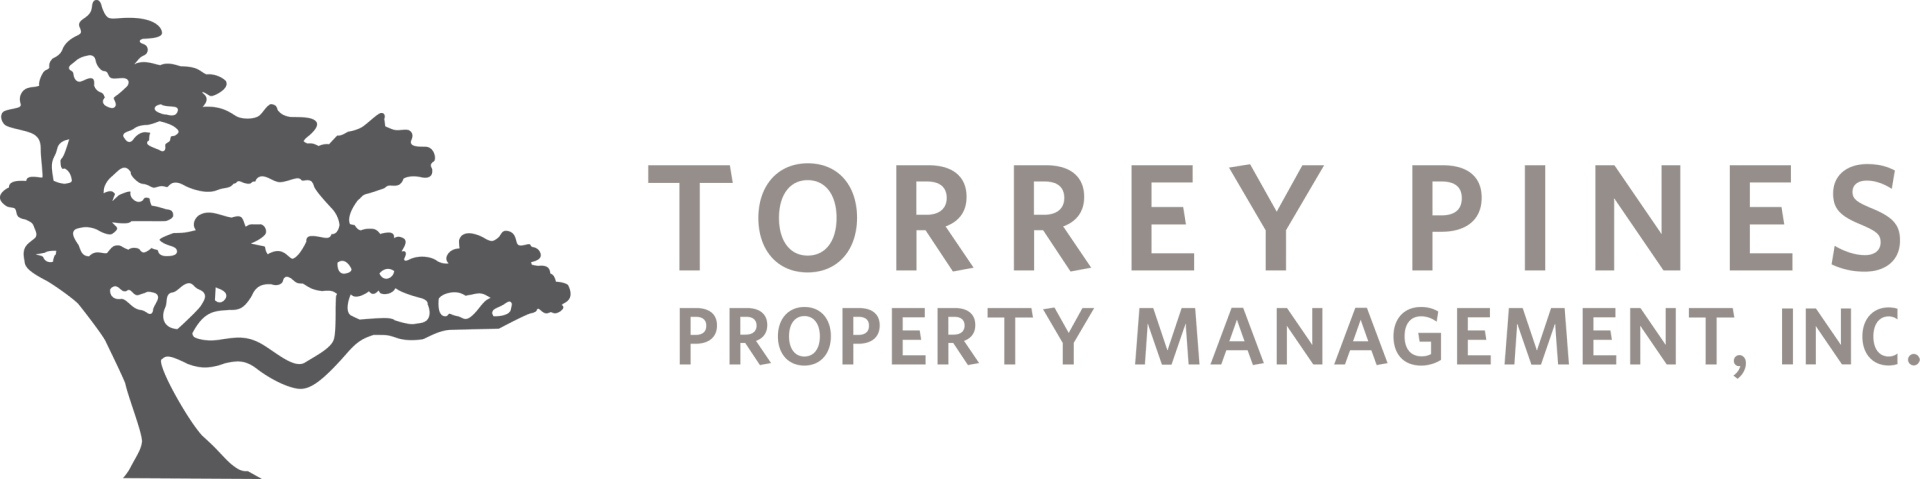 Torrey Pines Property Management Home Page